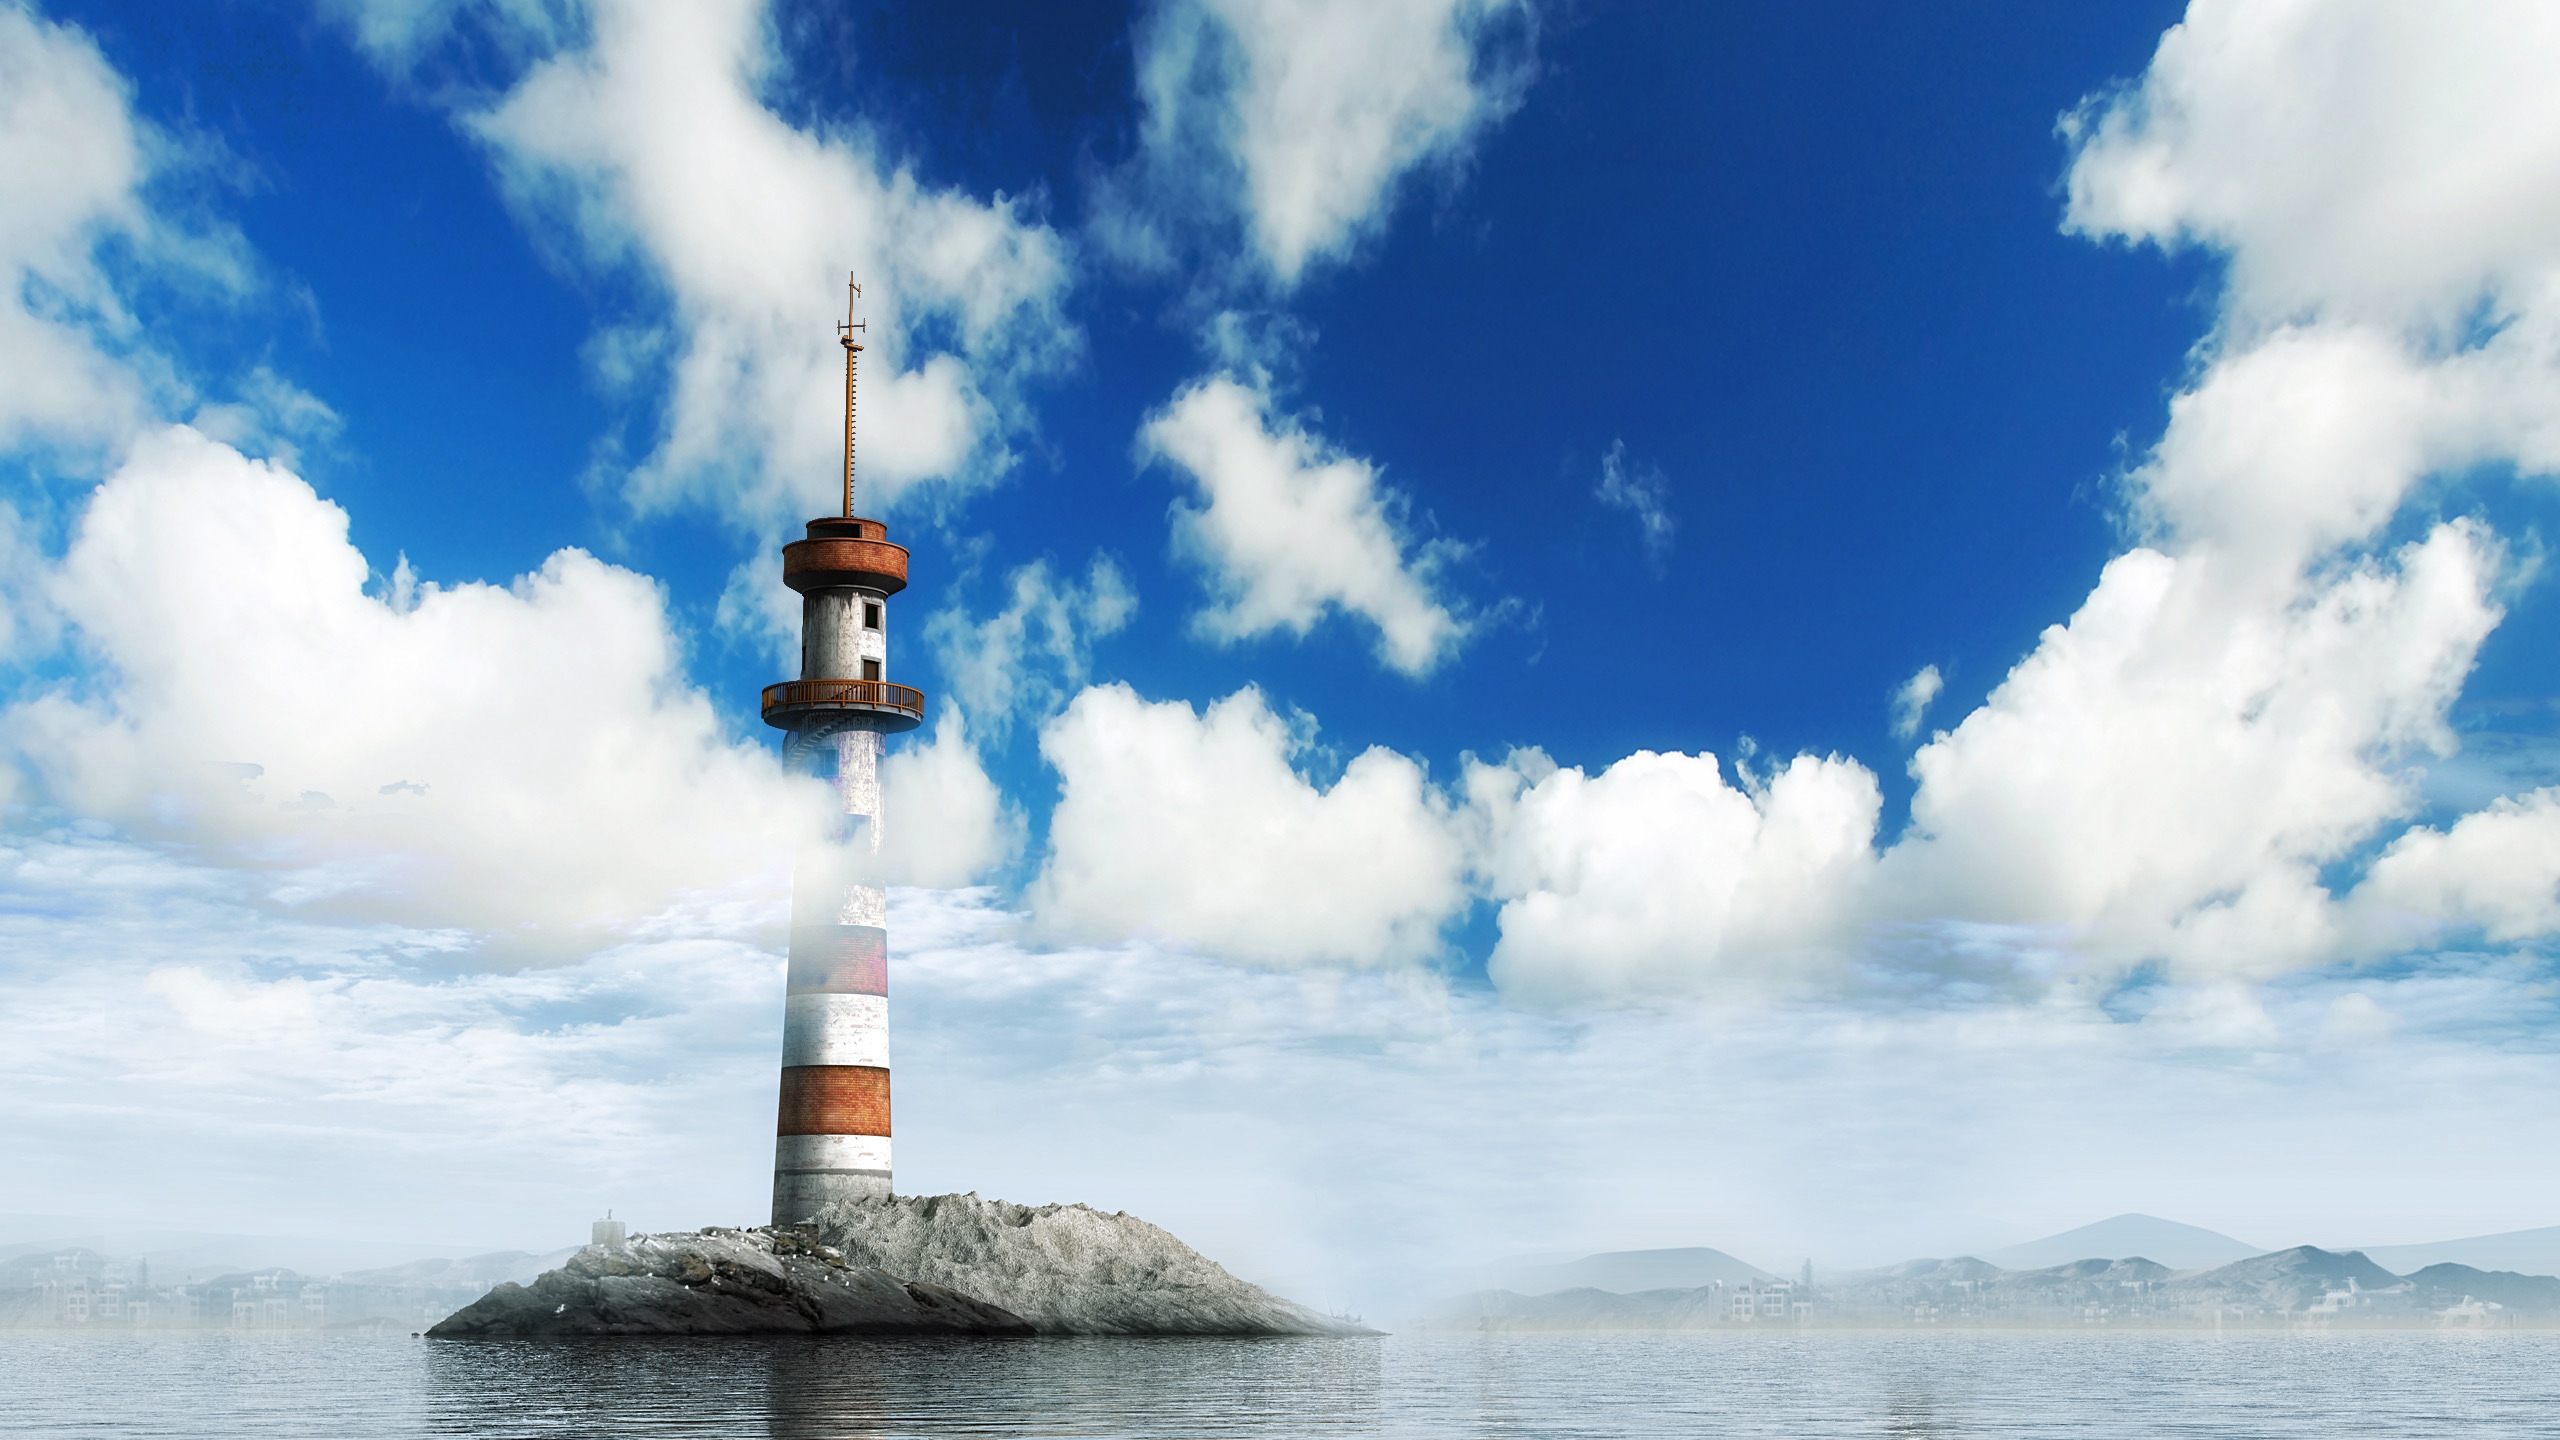 The Lighthouse for 2560x1440 HDTV resolution